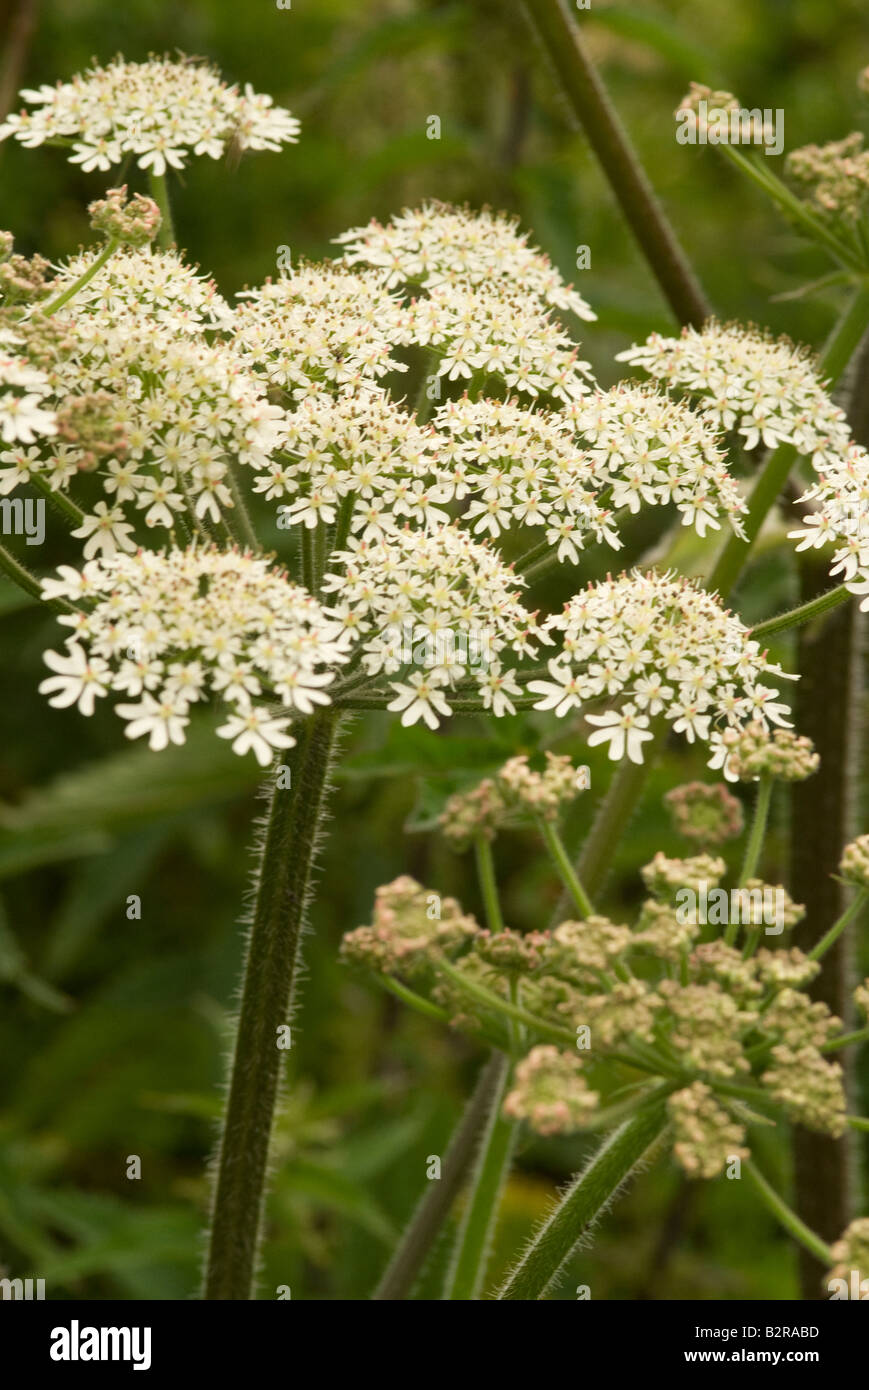 White Umbels of Flowering Cow Parsnip in Hedgerow near Carrick Dumfries and Galloway scotland United Kingdom UK Stock Photo